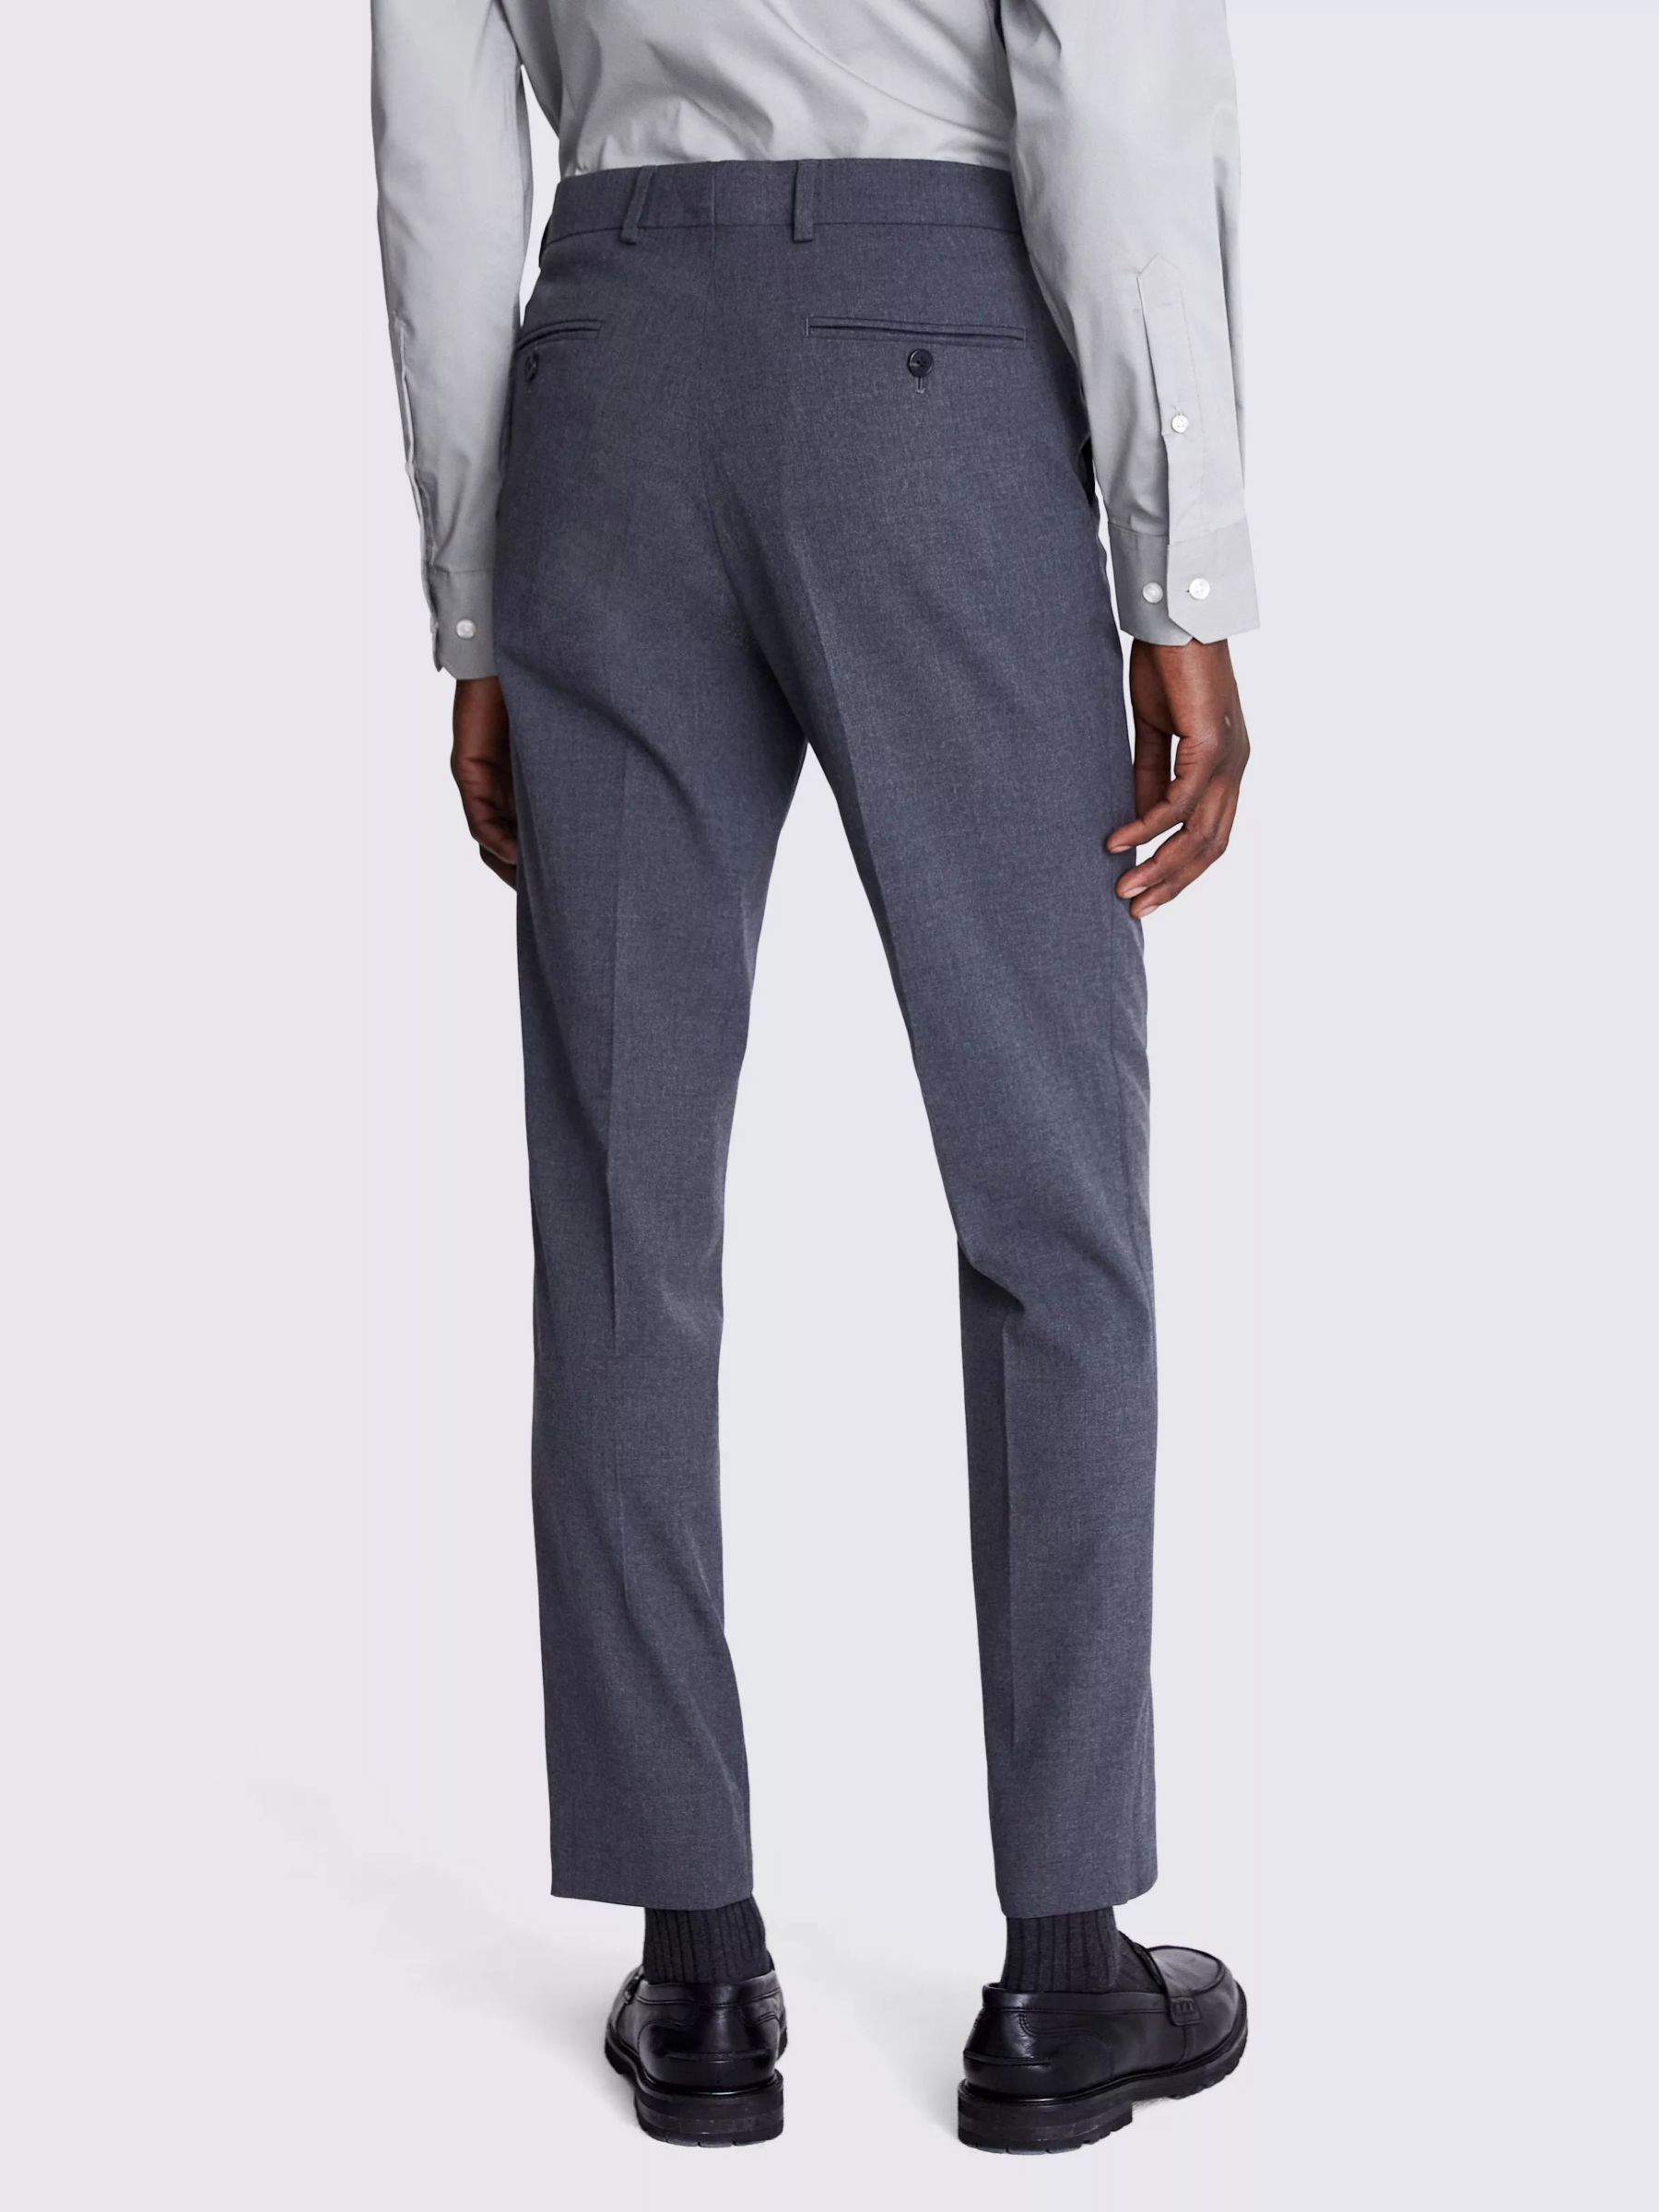 Moss Tailored Fit Trousers, Grey, 28R